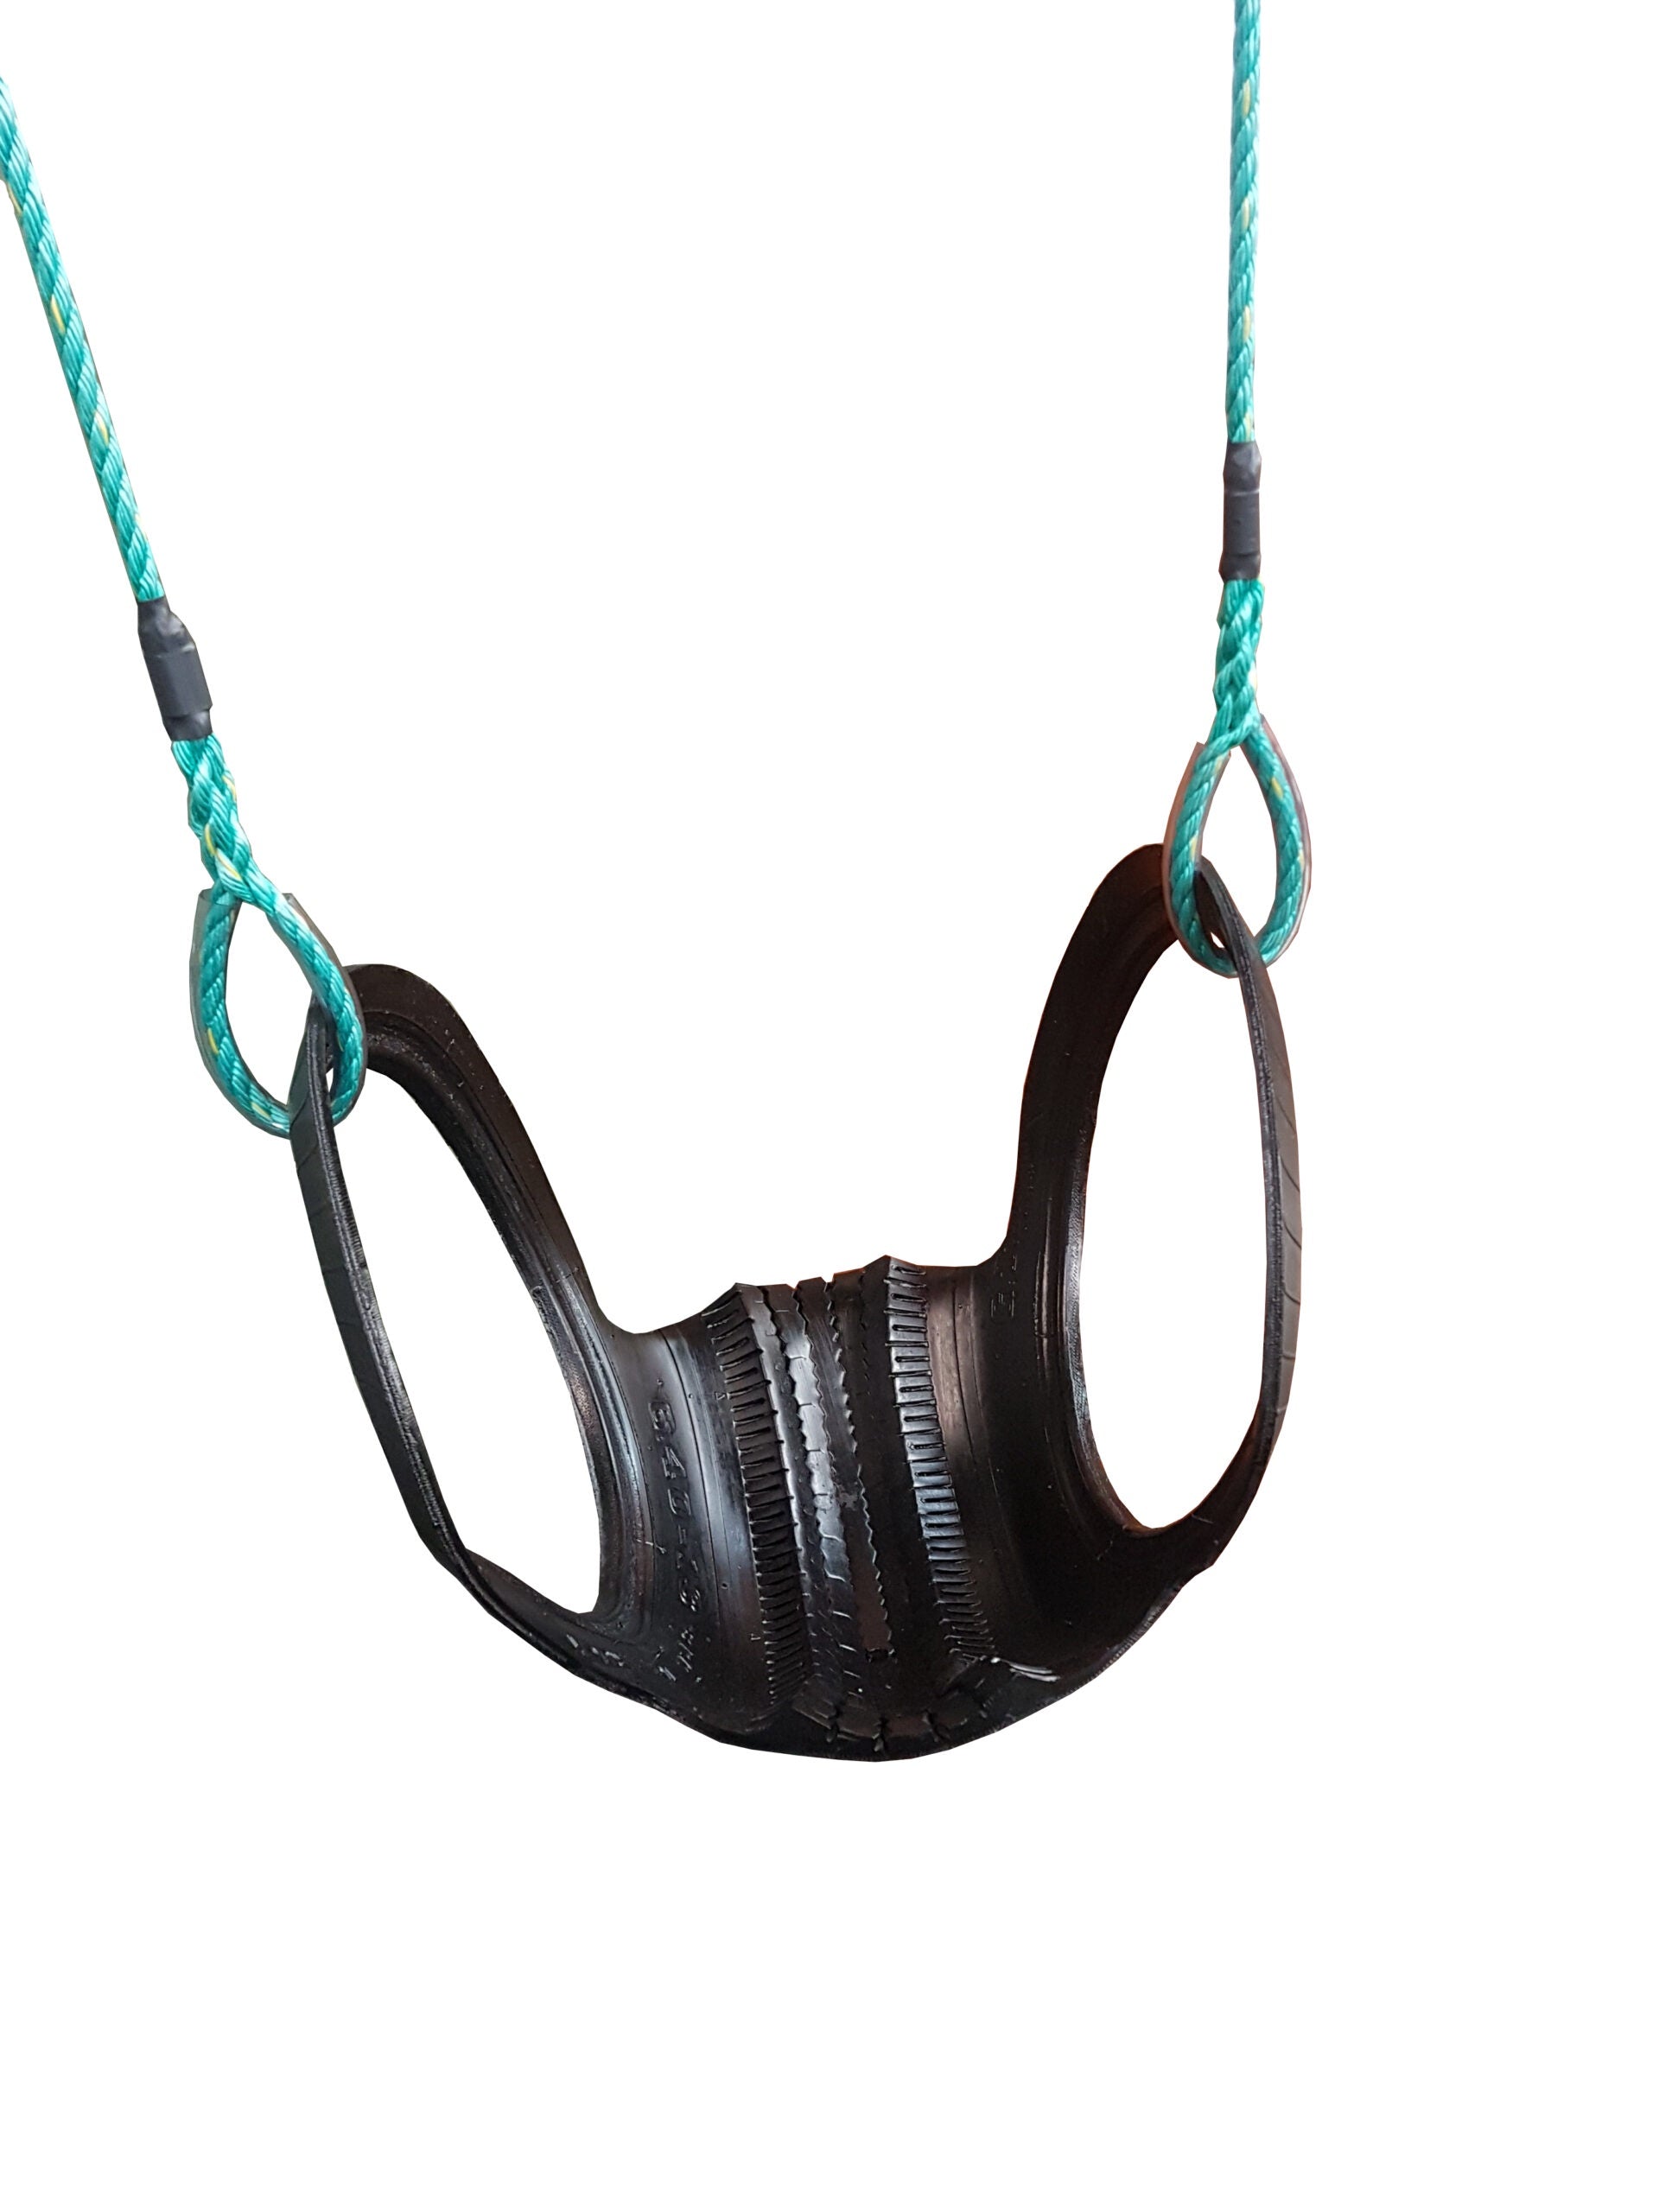 Outdoor Play Equipment - Tyre Basket Swing - Fixed Length